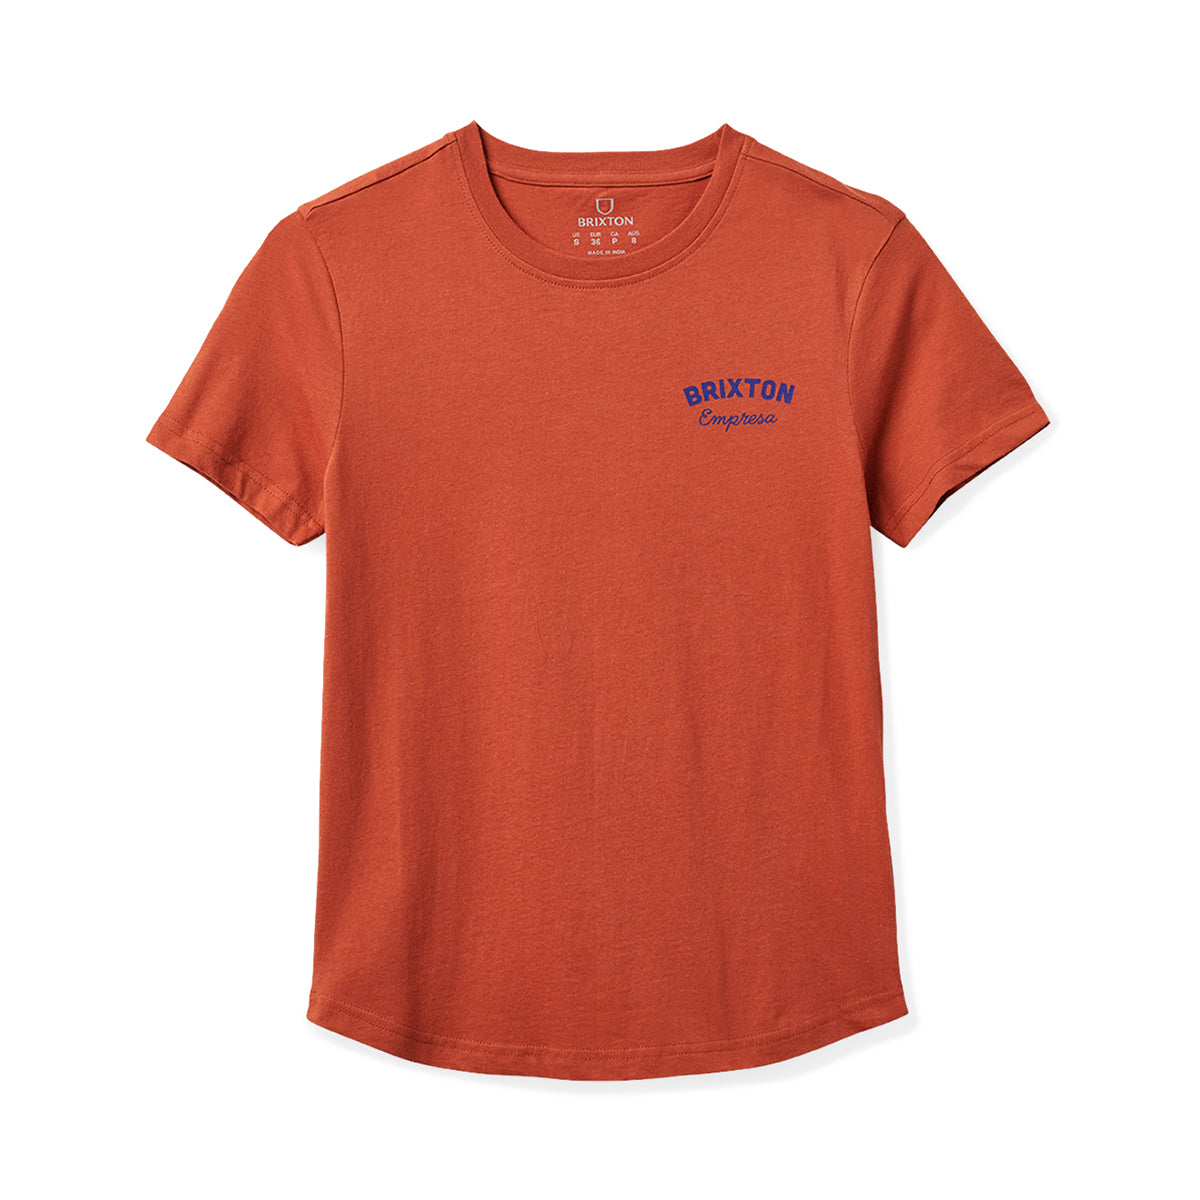 EMPRESA FITTED CREW TEE